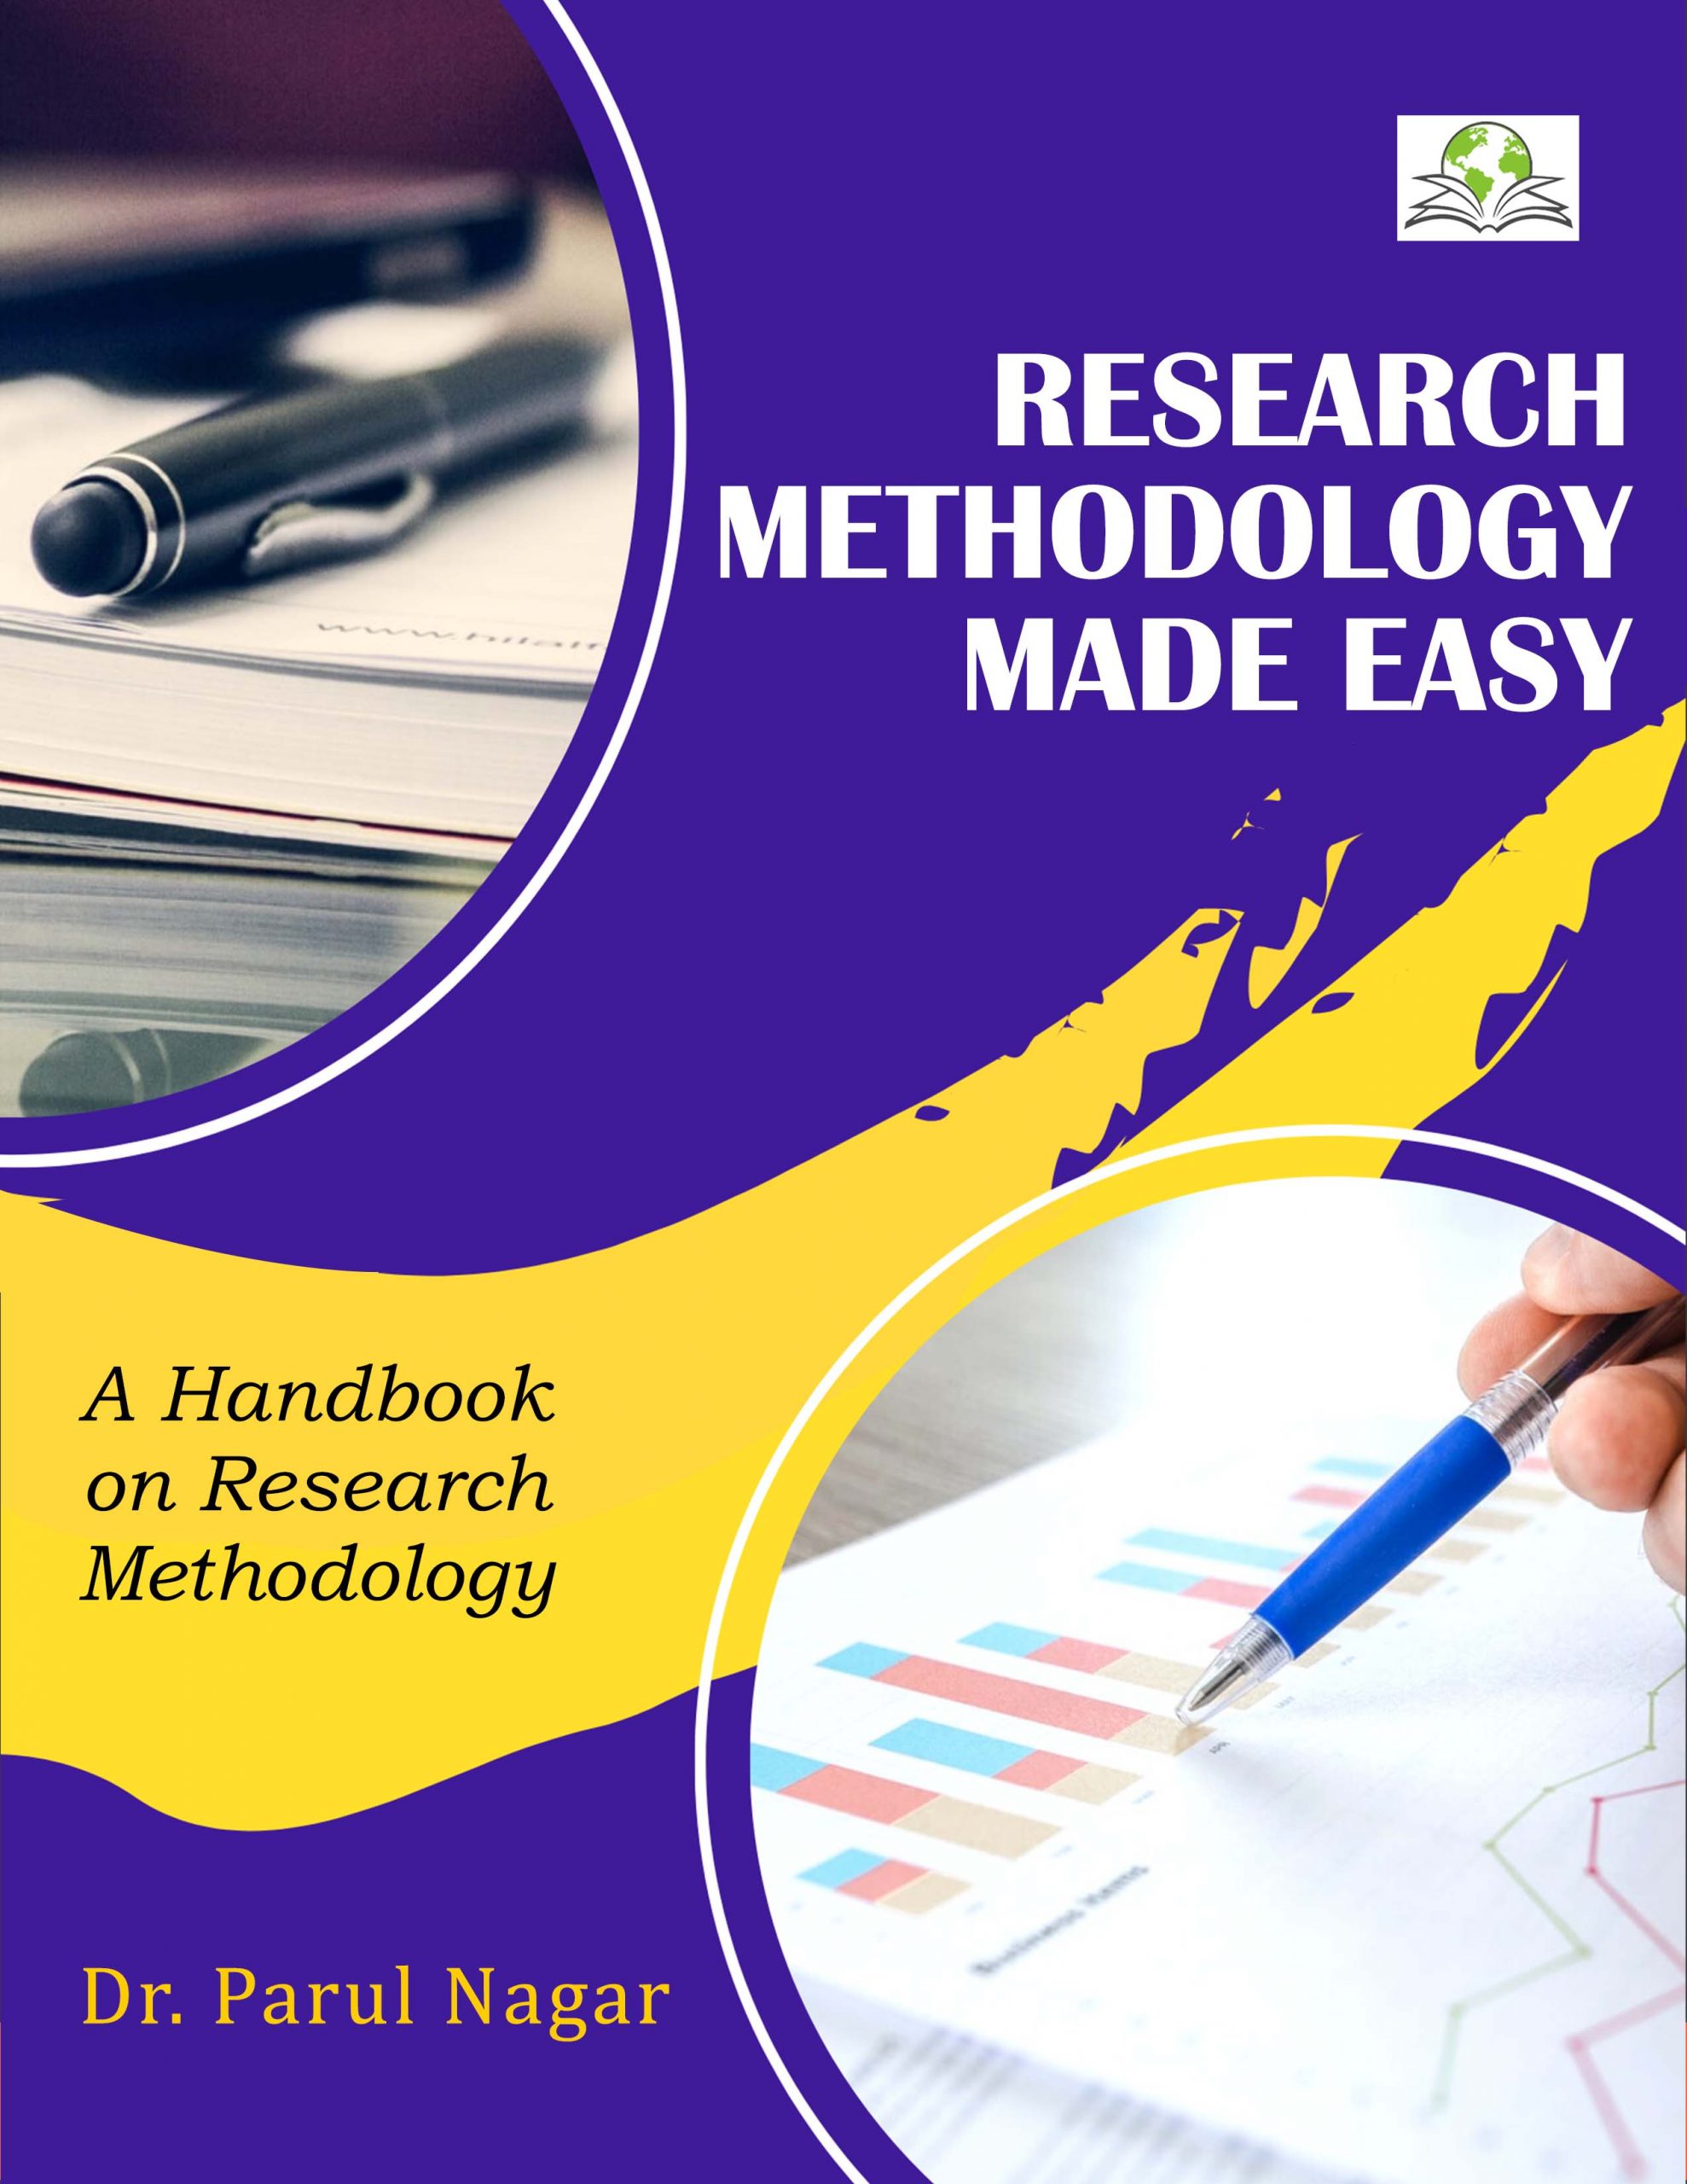 e book on research methodology